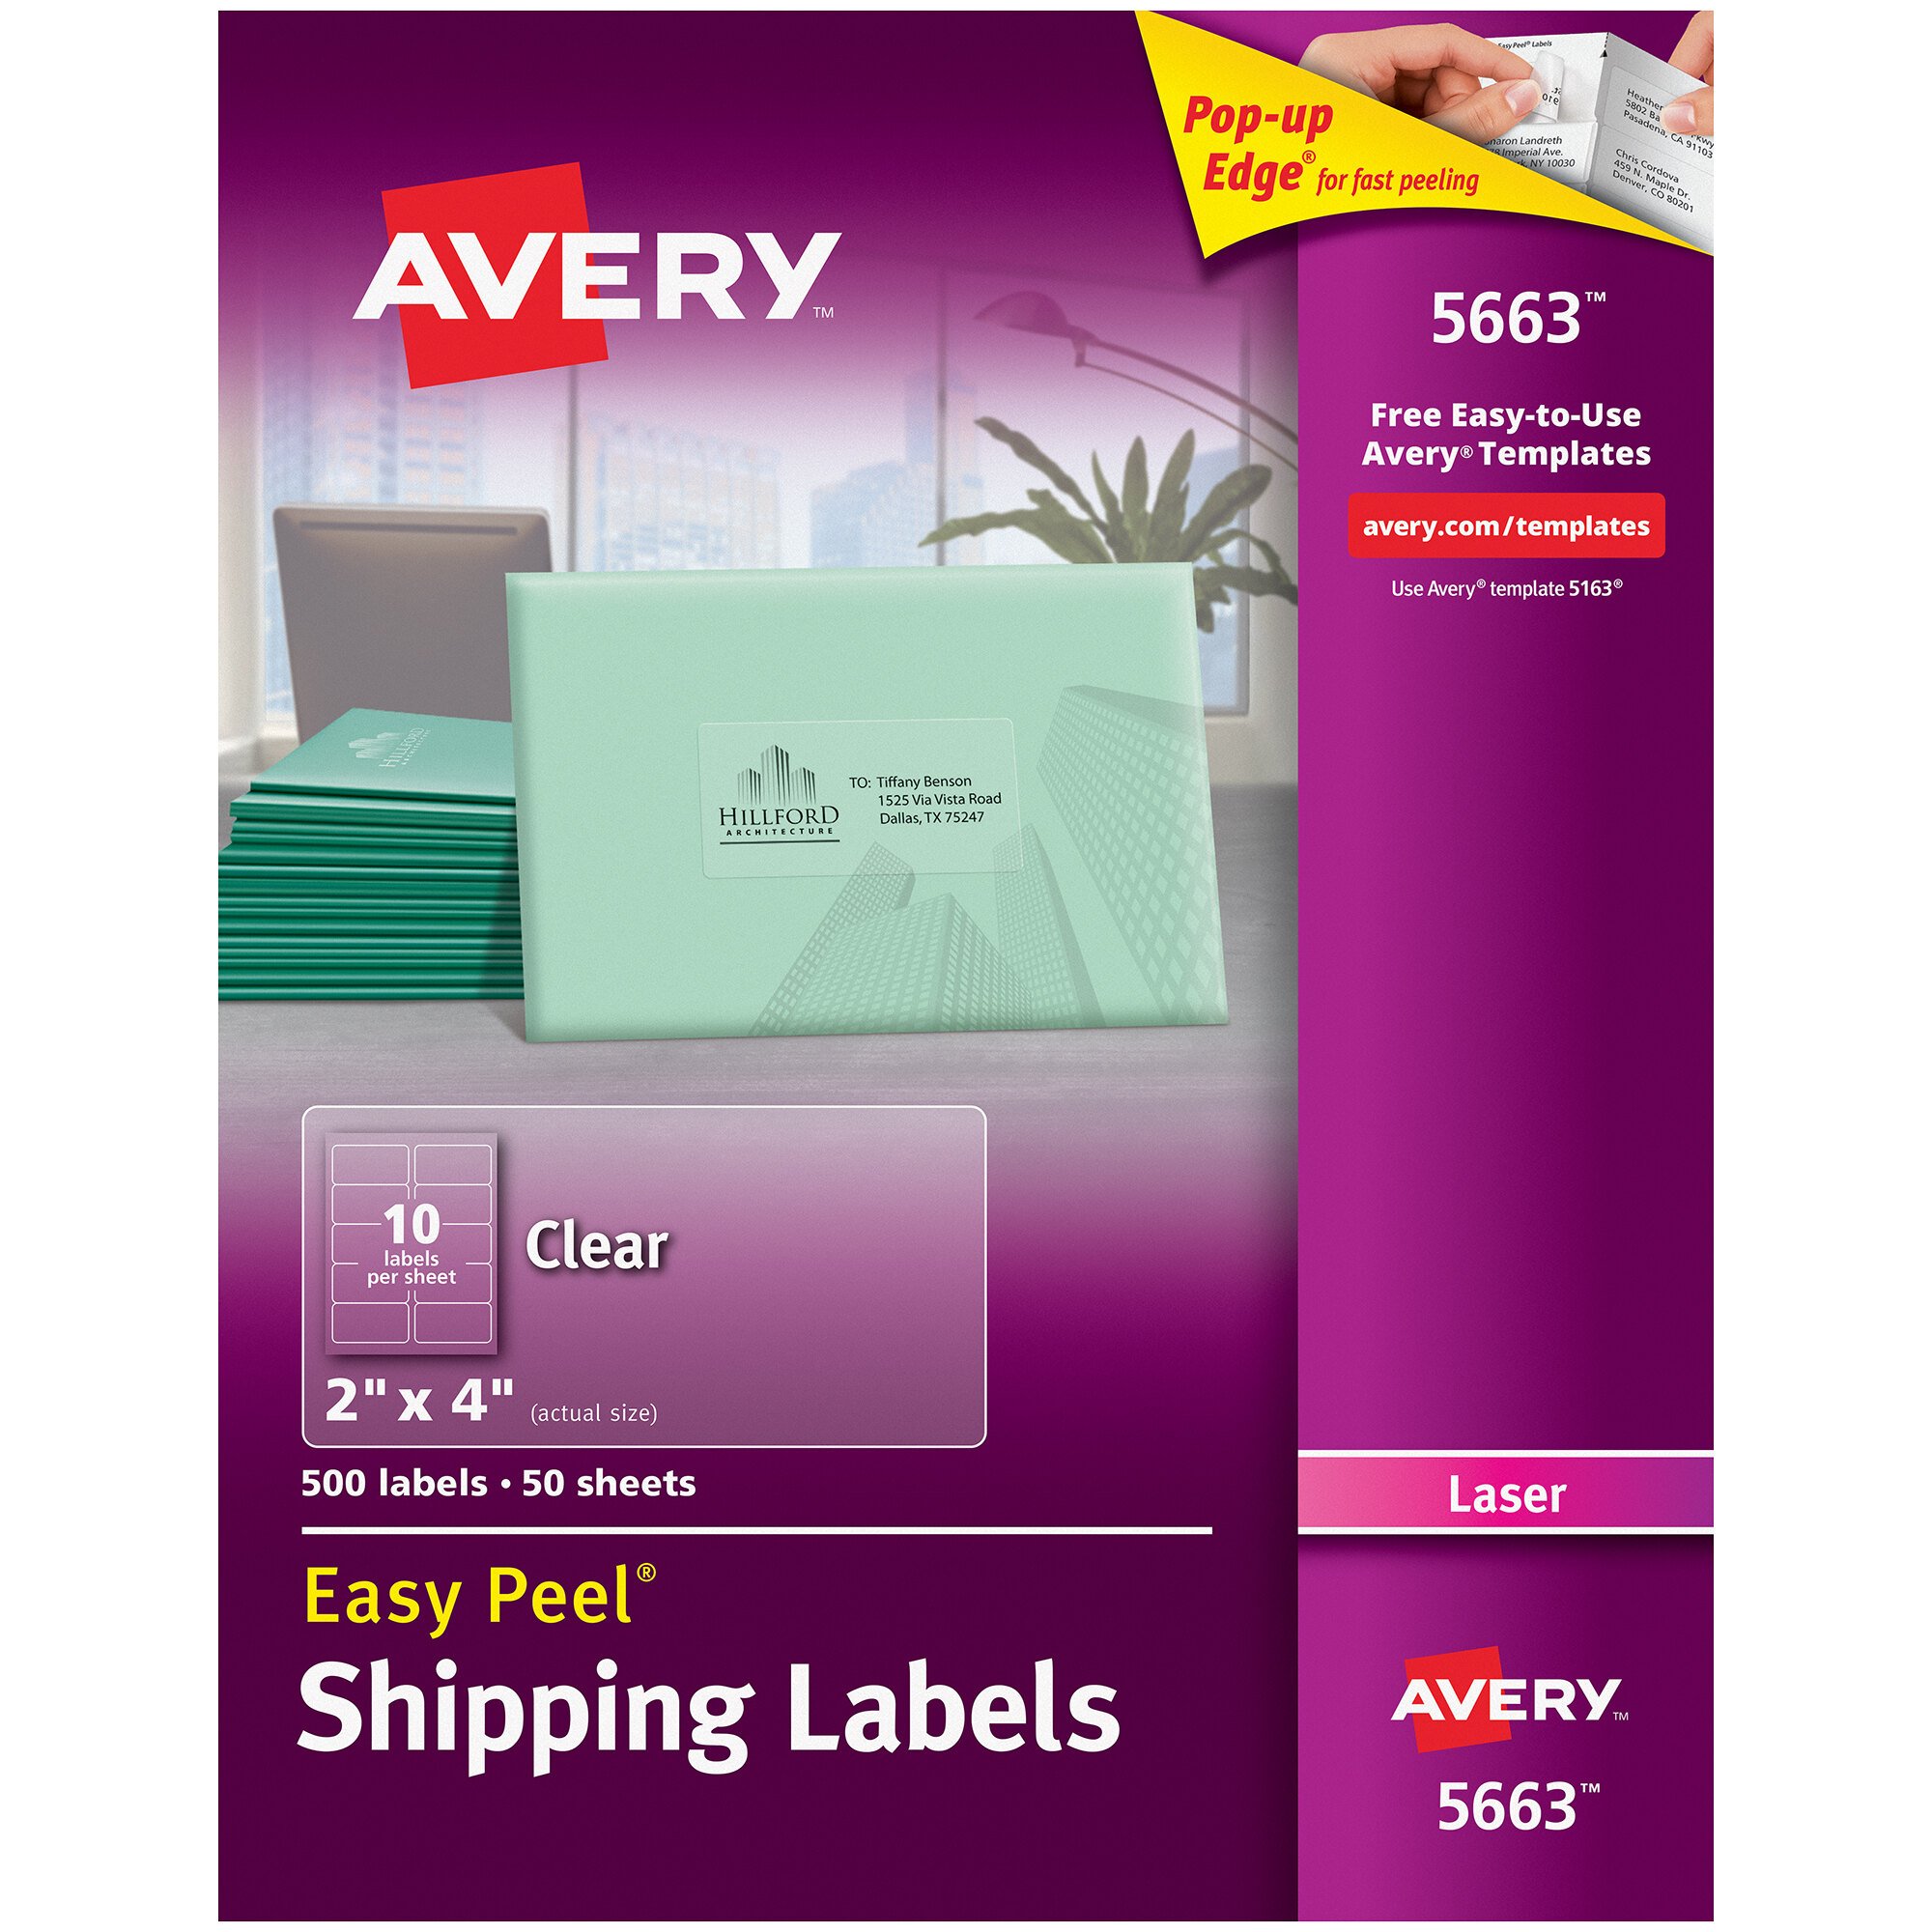 Avery 5663 2" x 4" Easy Peel Clear Shipping Labels 500/Box